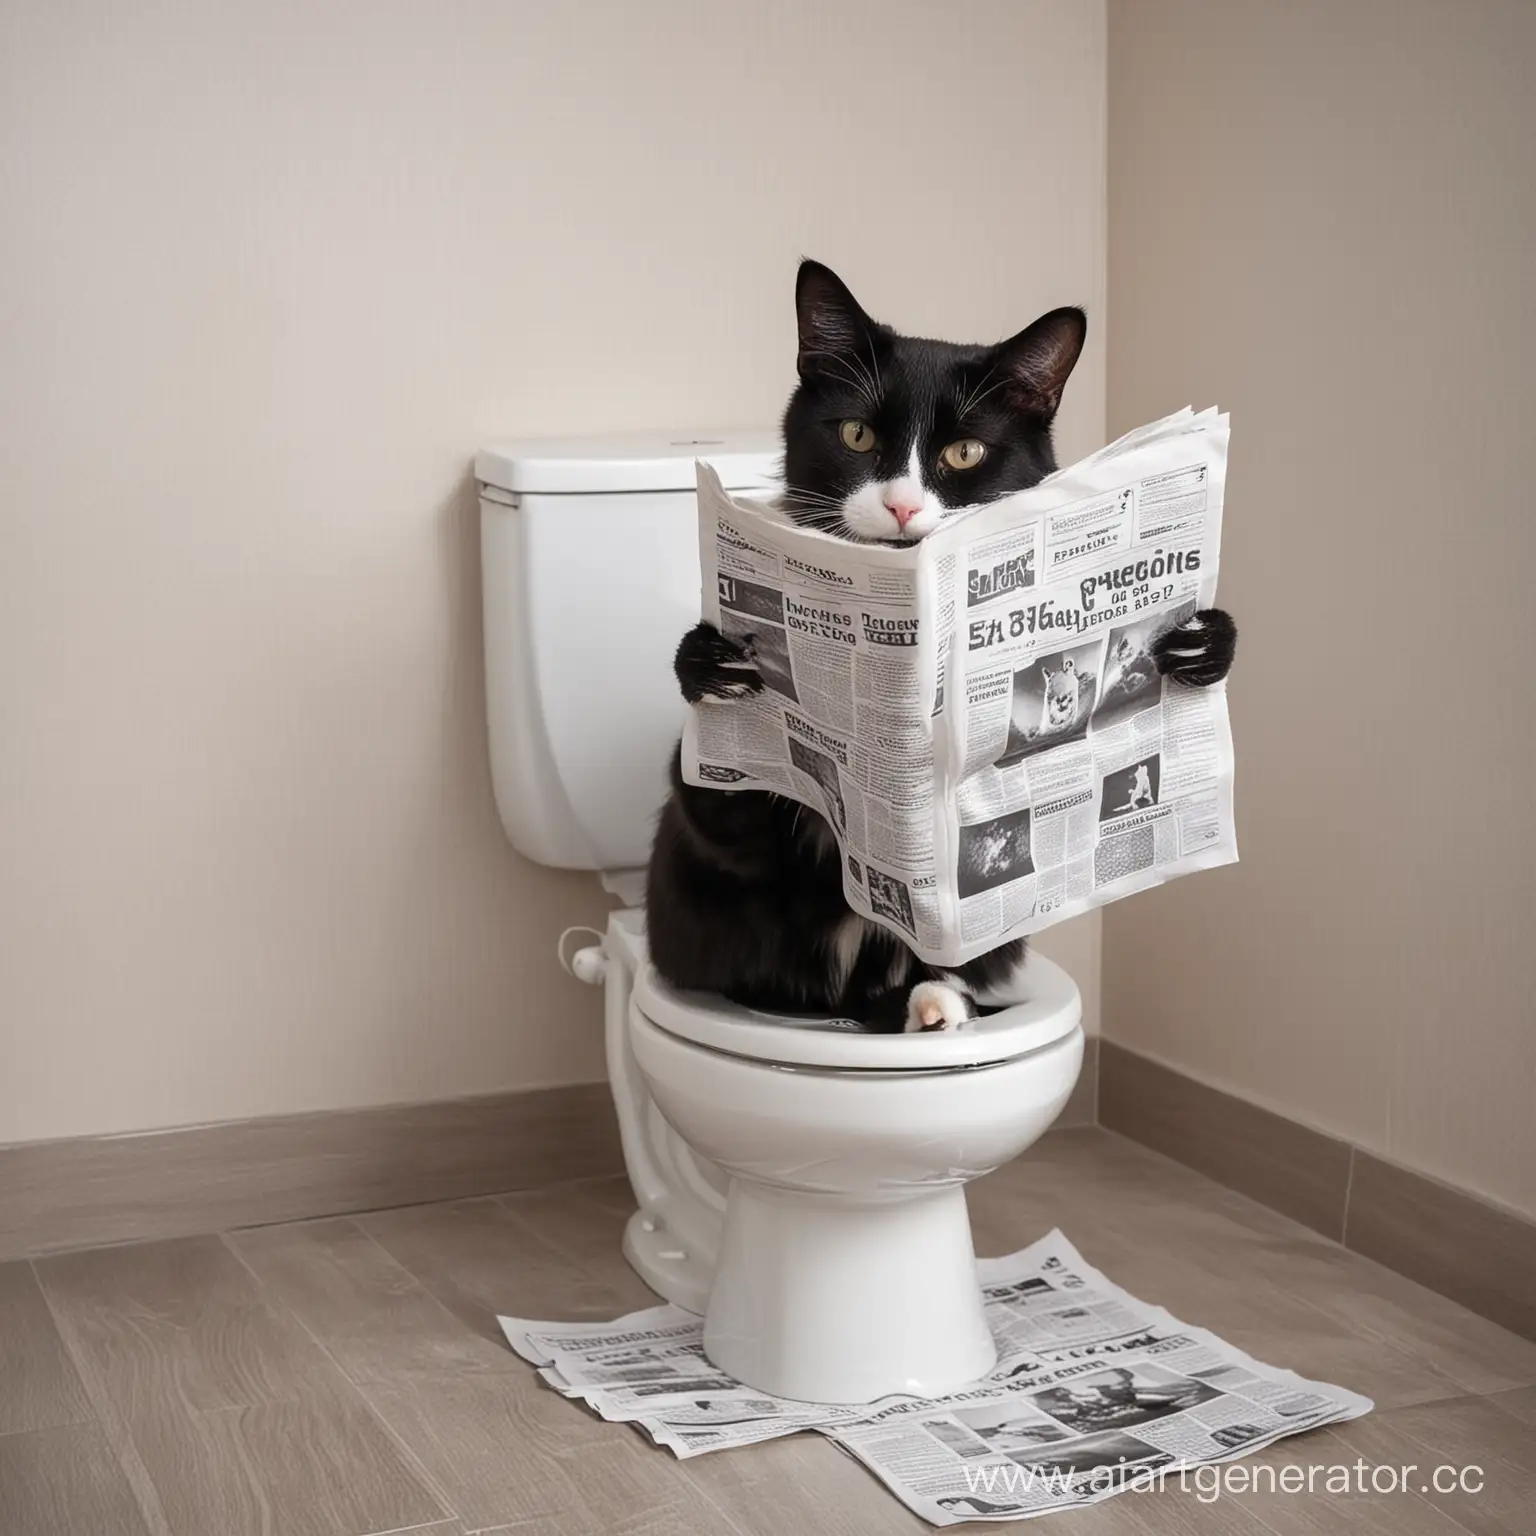 Intelligent-Black-and-White-Cat-Reading-Newspaper-on-Toilet